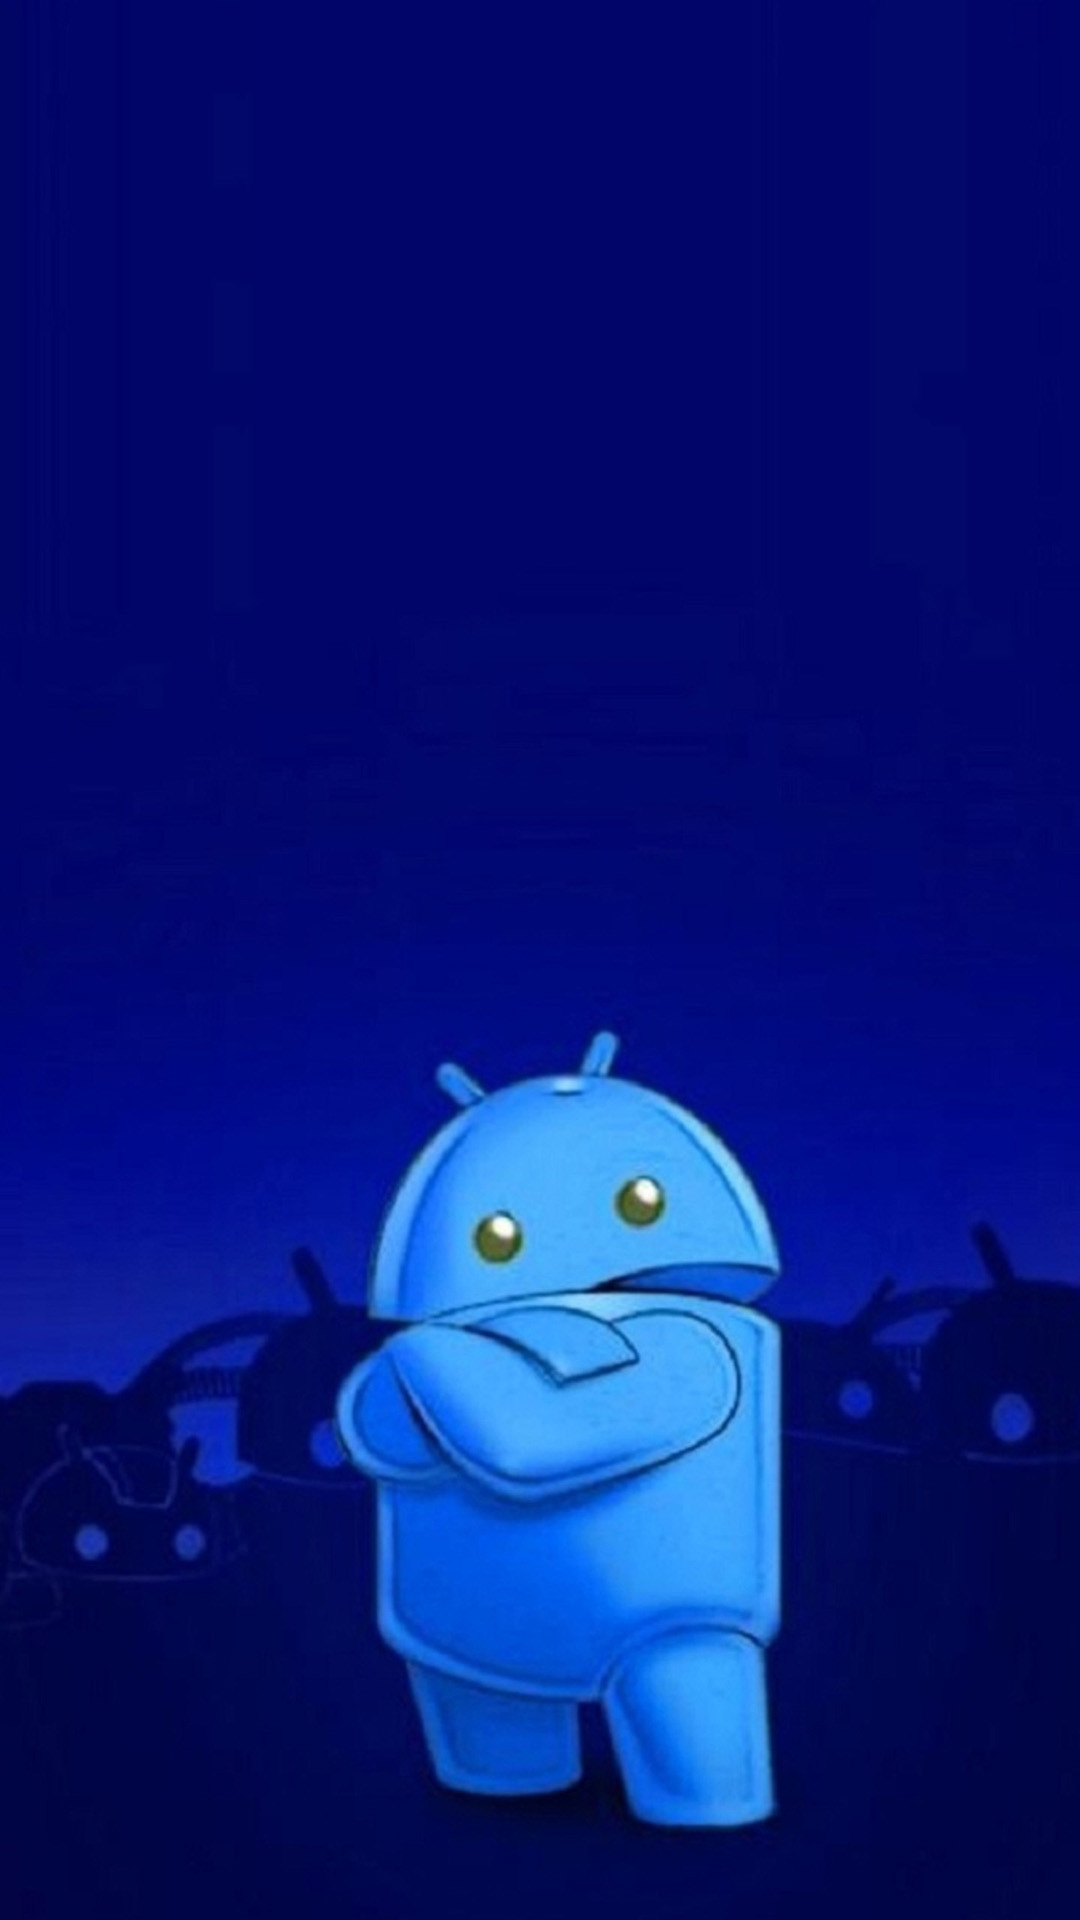 Android Wallpaper Blue (78+ images)1080 x 1920